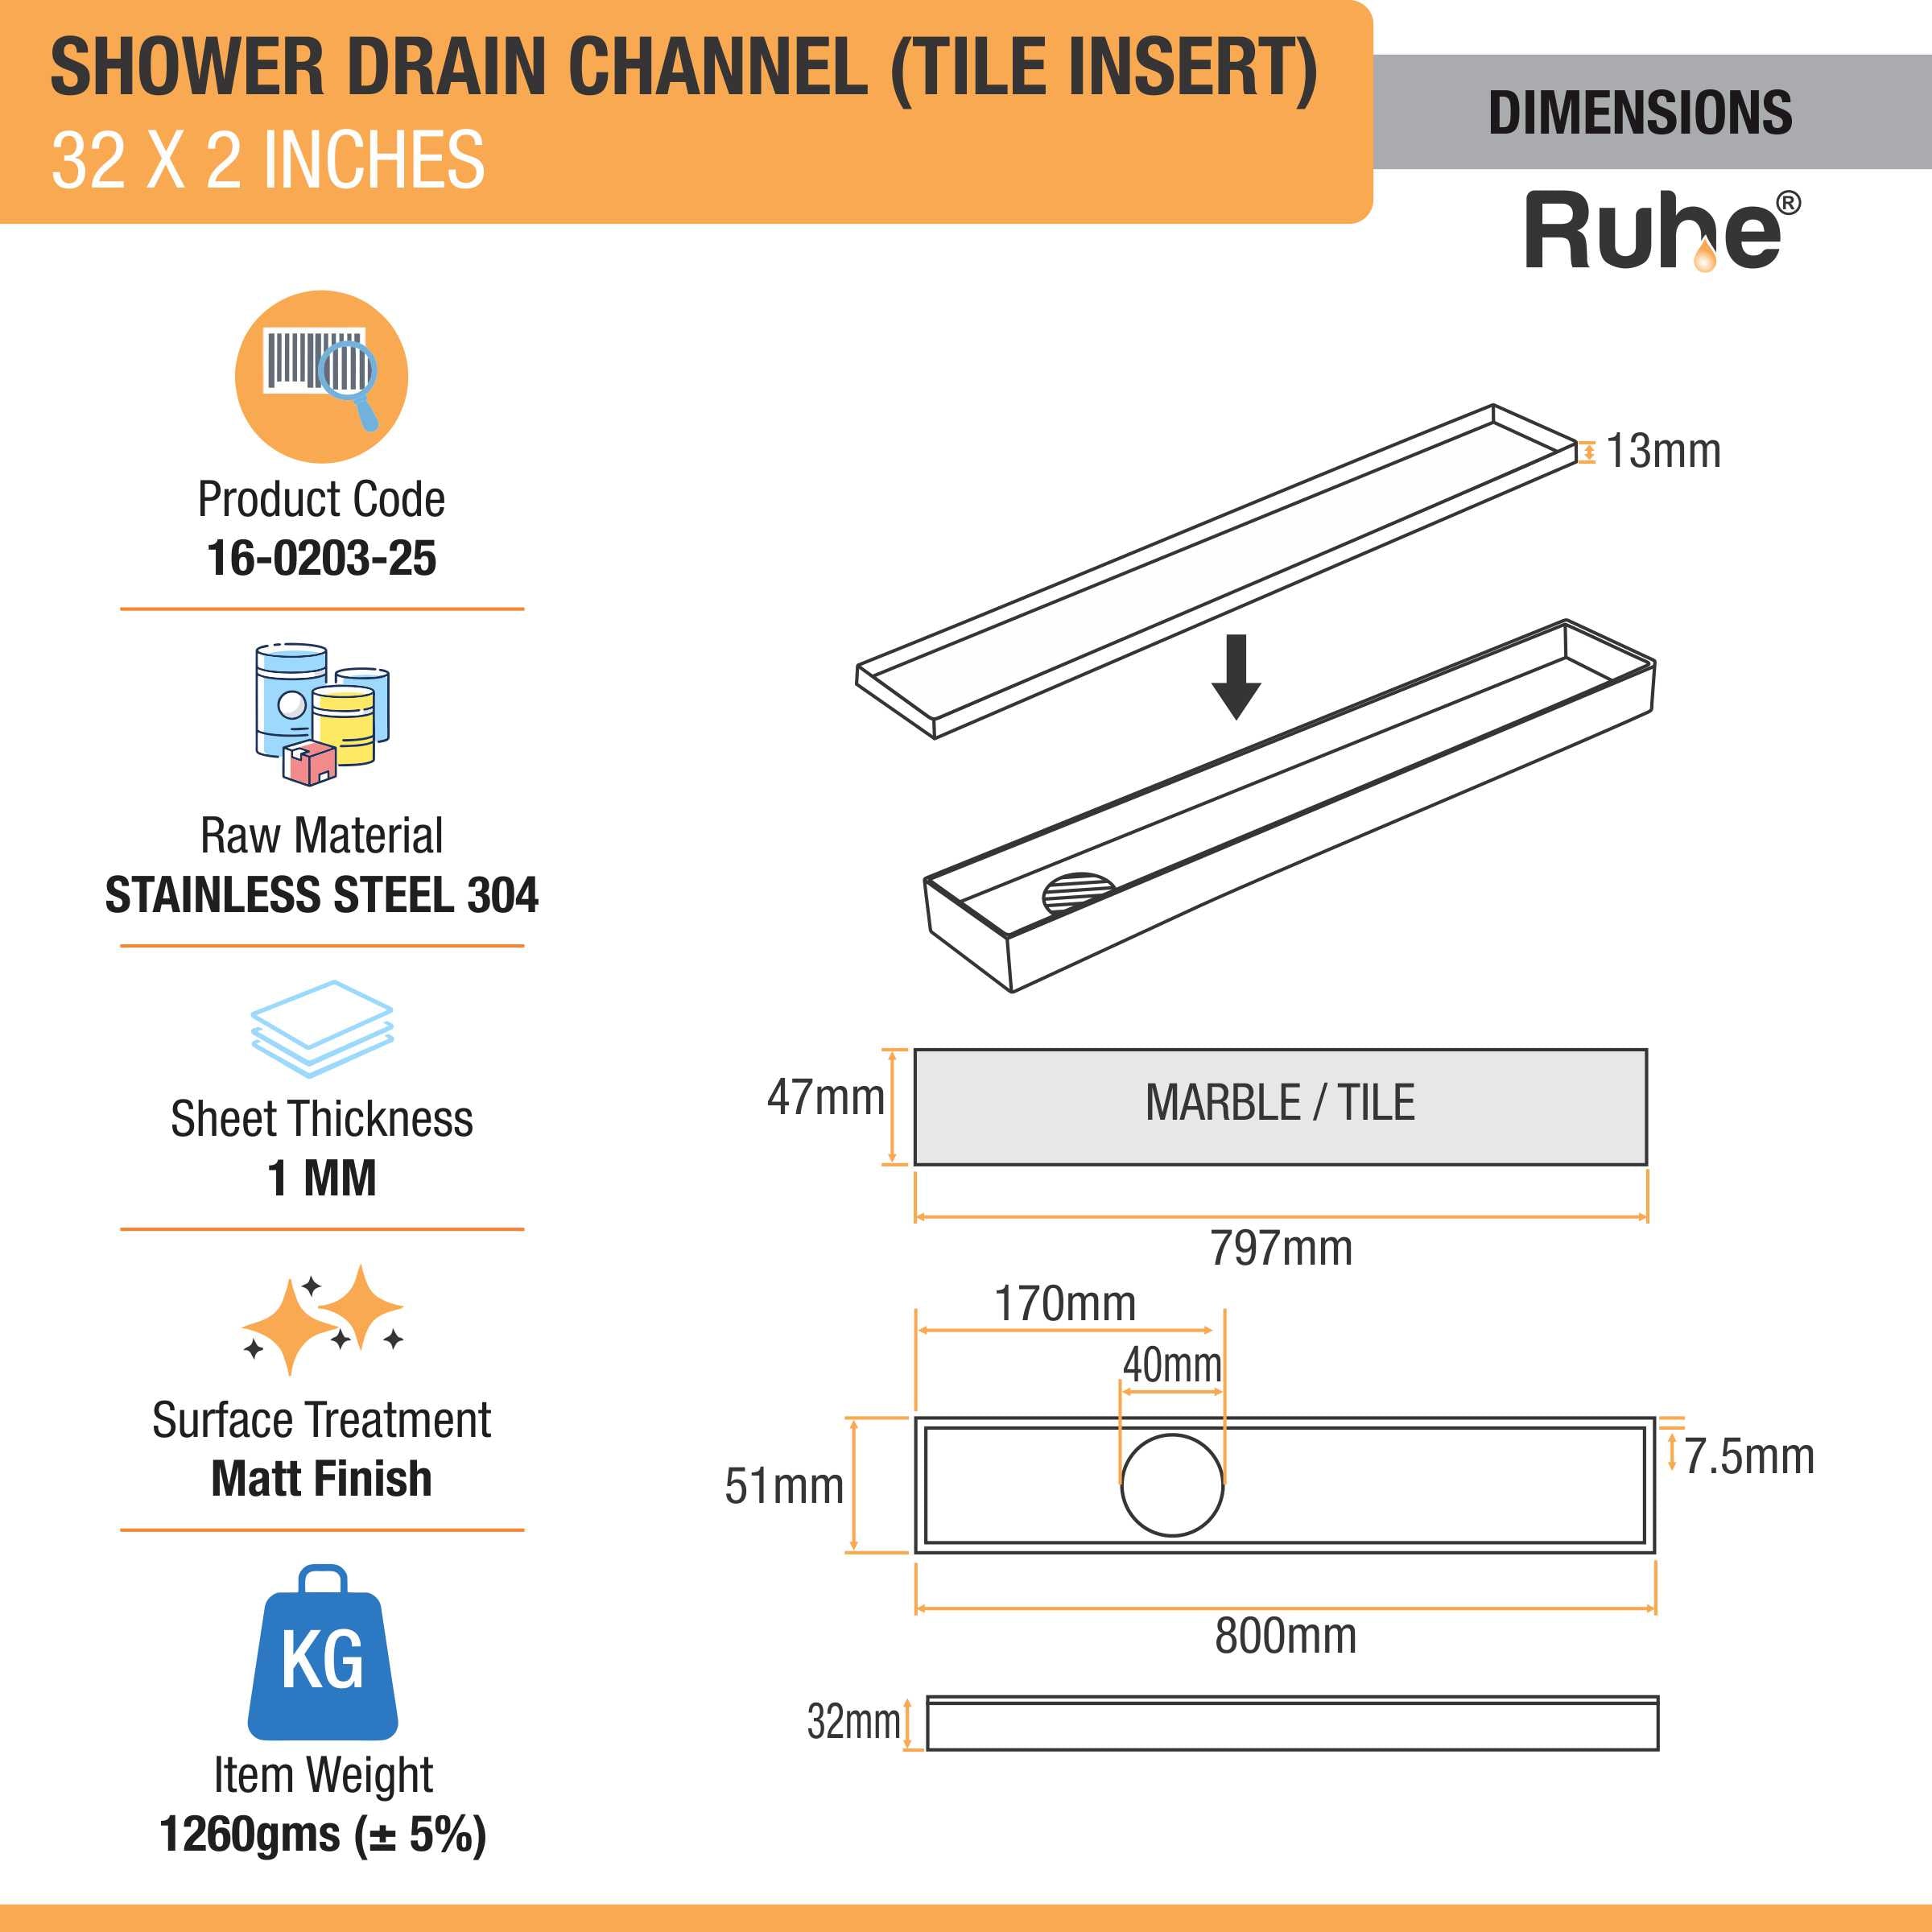 Tile Insert Shower Drain Channel (32 x 2 Inches) (304 Grade) dimensions and size